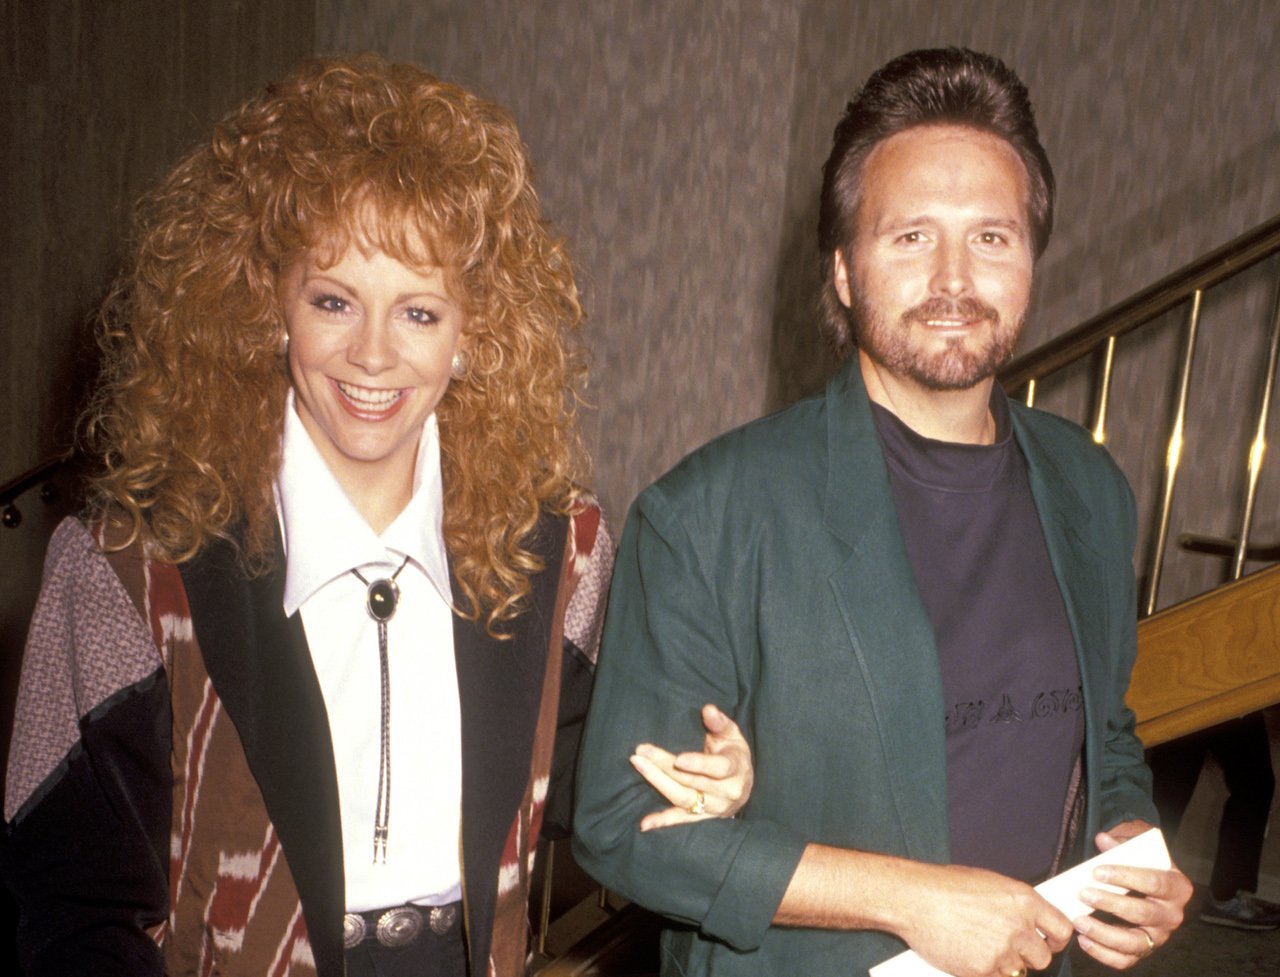 Reba McEntire in a brown jacket, walking arm in arm with Narvel Blackstock, in a green jacket c. 1991